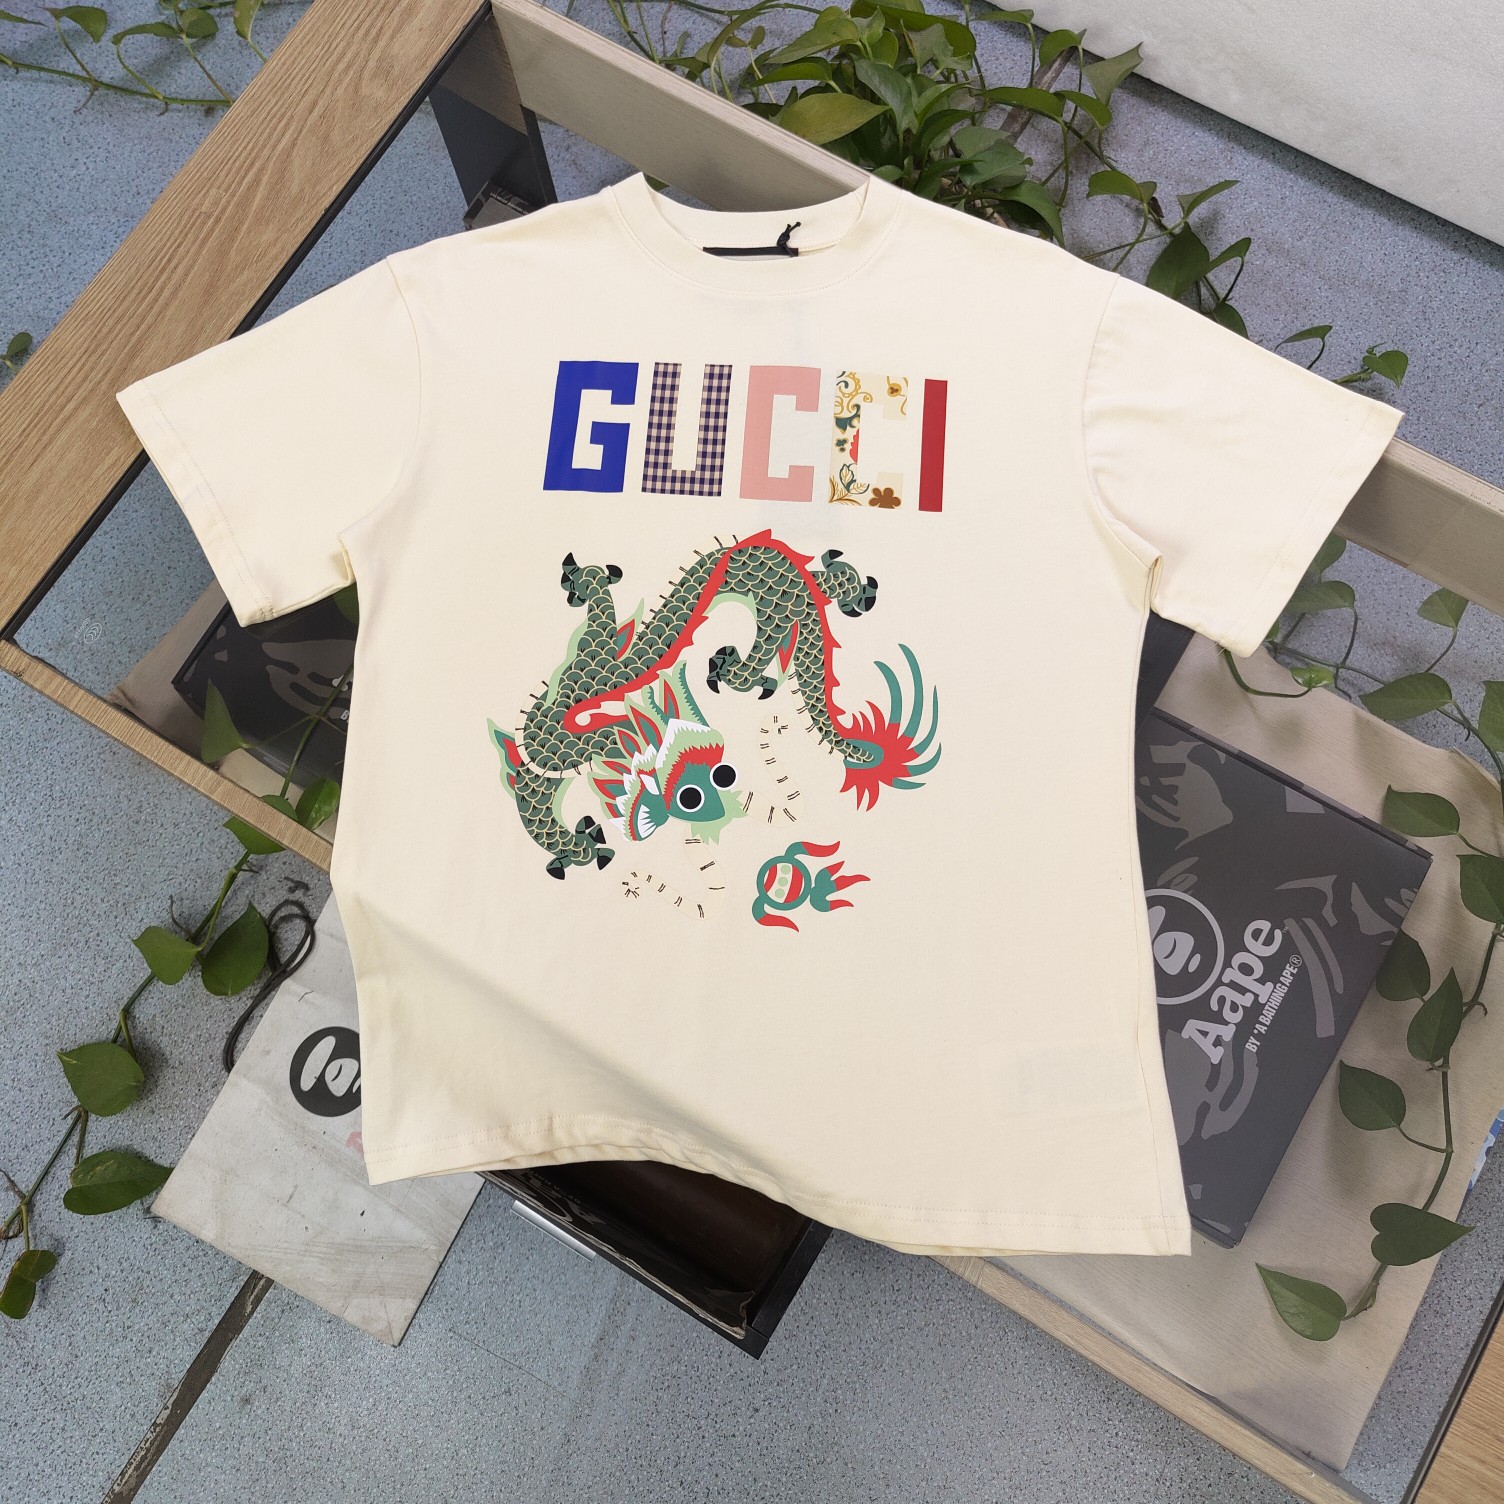 Gucci Clothing T-Shirt Apricot Color Black Printing Unisex Cotton Spring/Summer Collection Short Sleeve XD99155